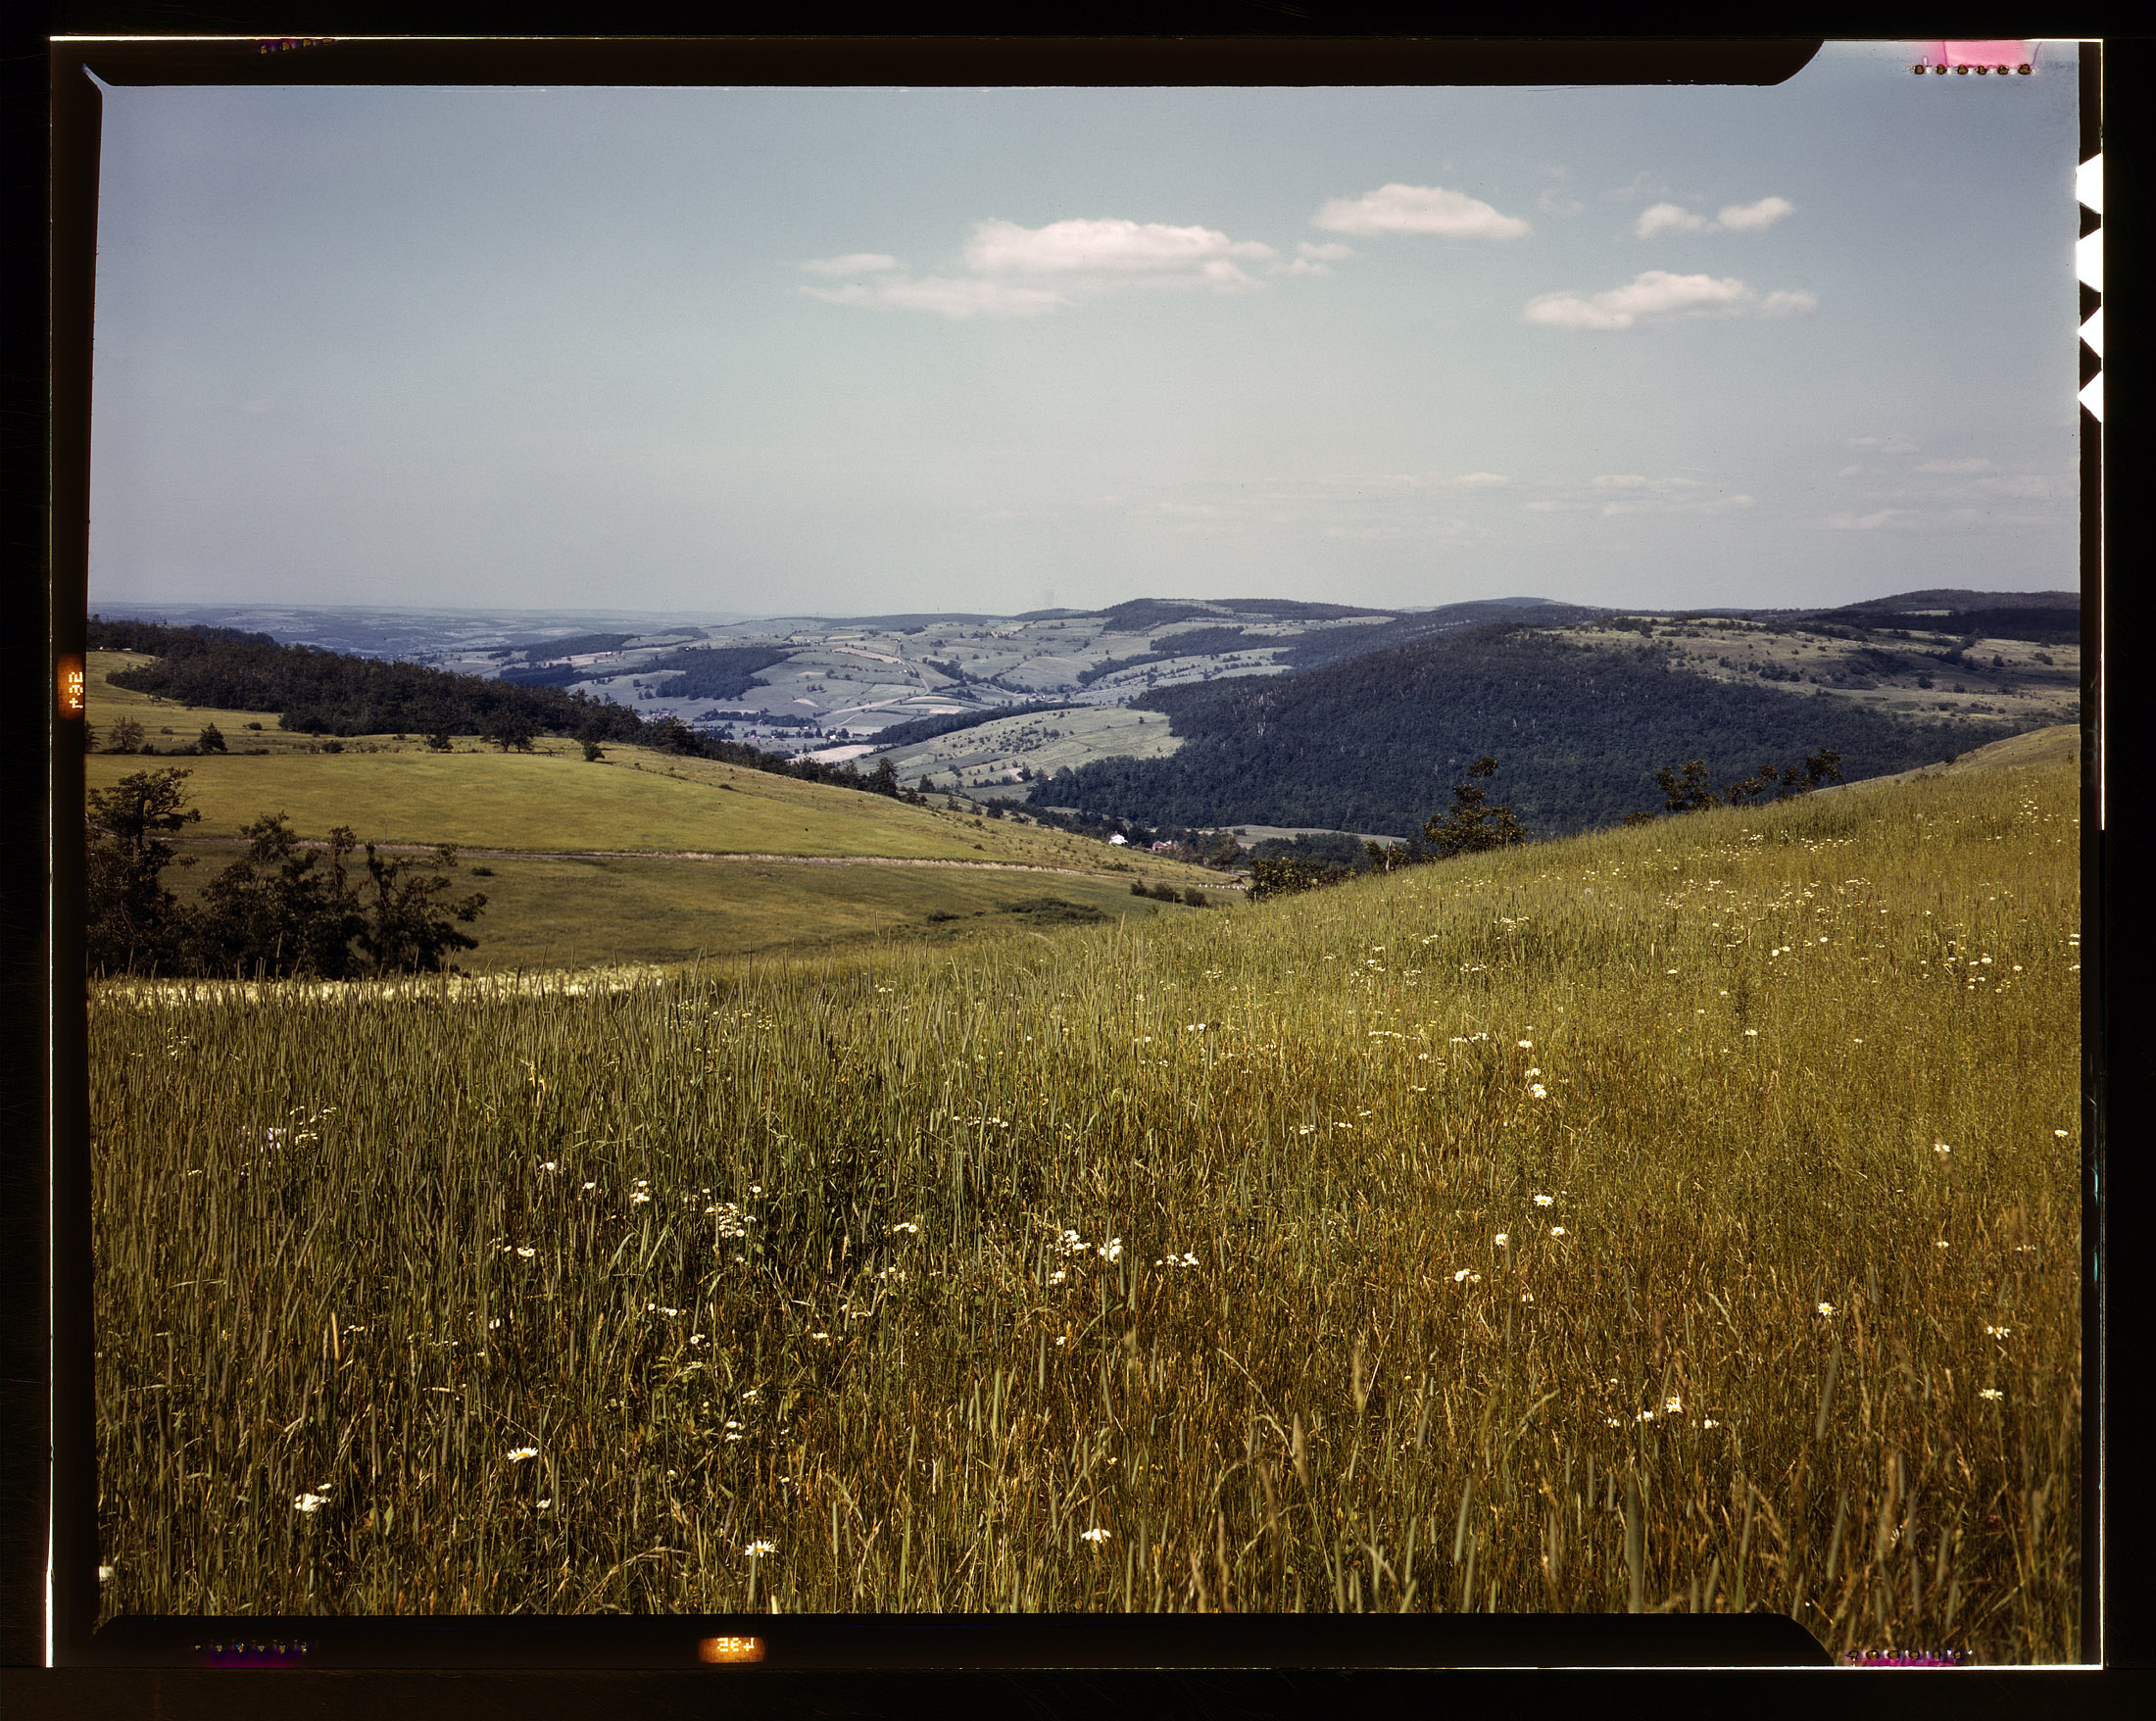 June 1943. Richmondville, New York. Farmland meadow in the Catskill Mountains. View full size. 4x5 Kodachrome transparency by John Collier.